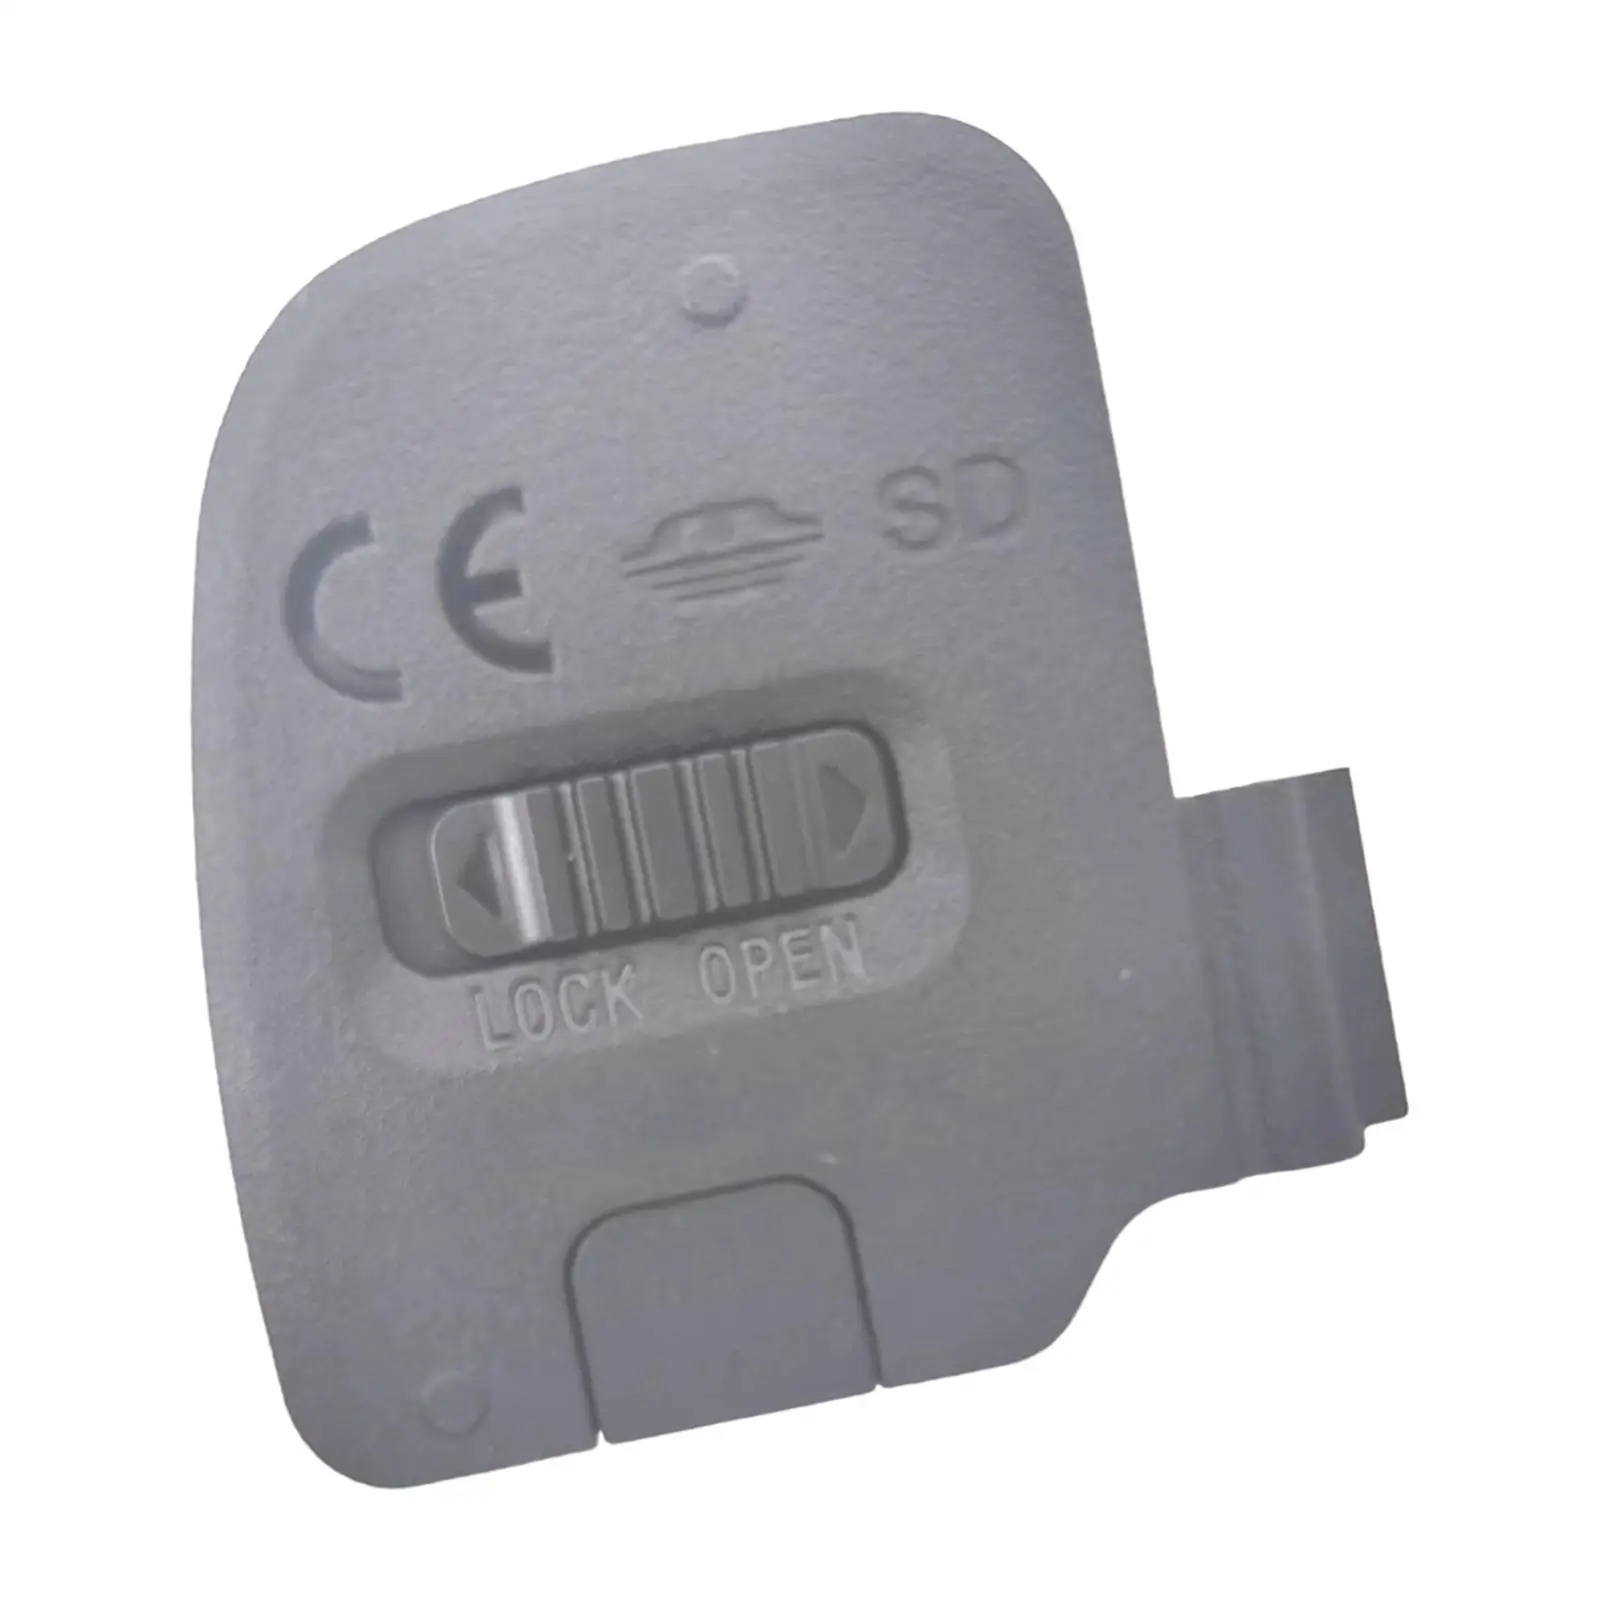 Battery Door Cover Batteries Cap Lid for A6000 Assembly Replacement Spare Parts Accessories